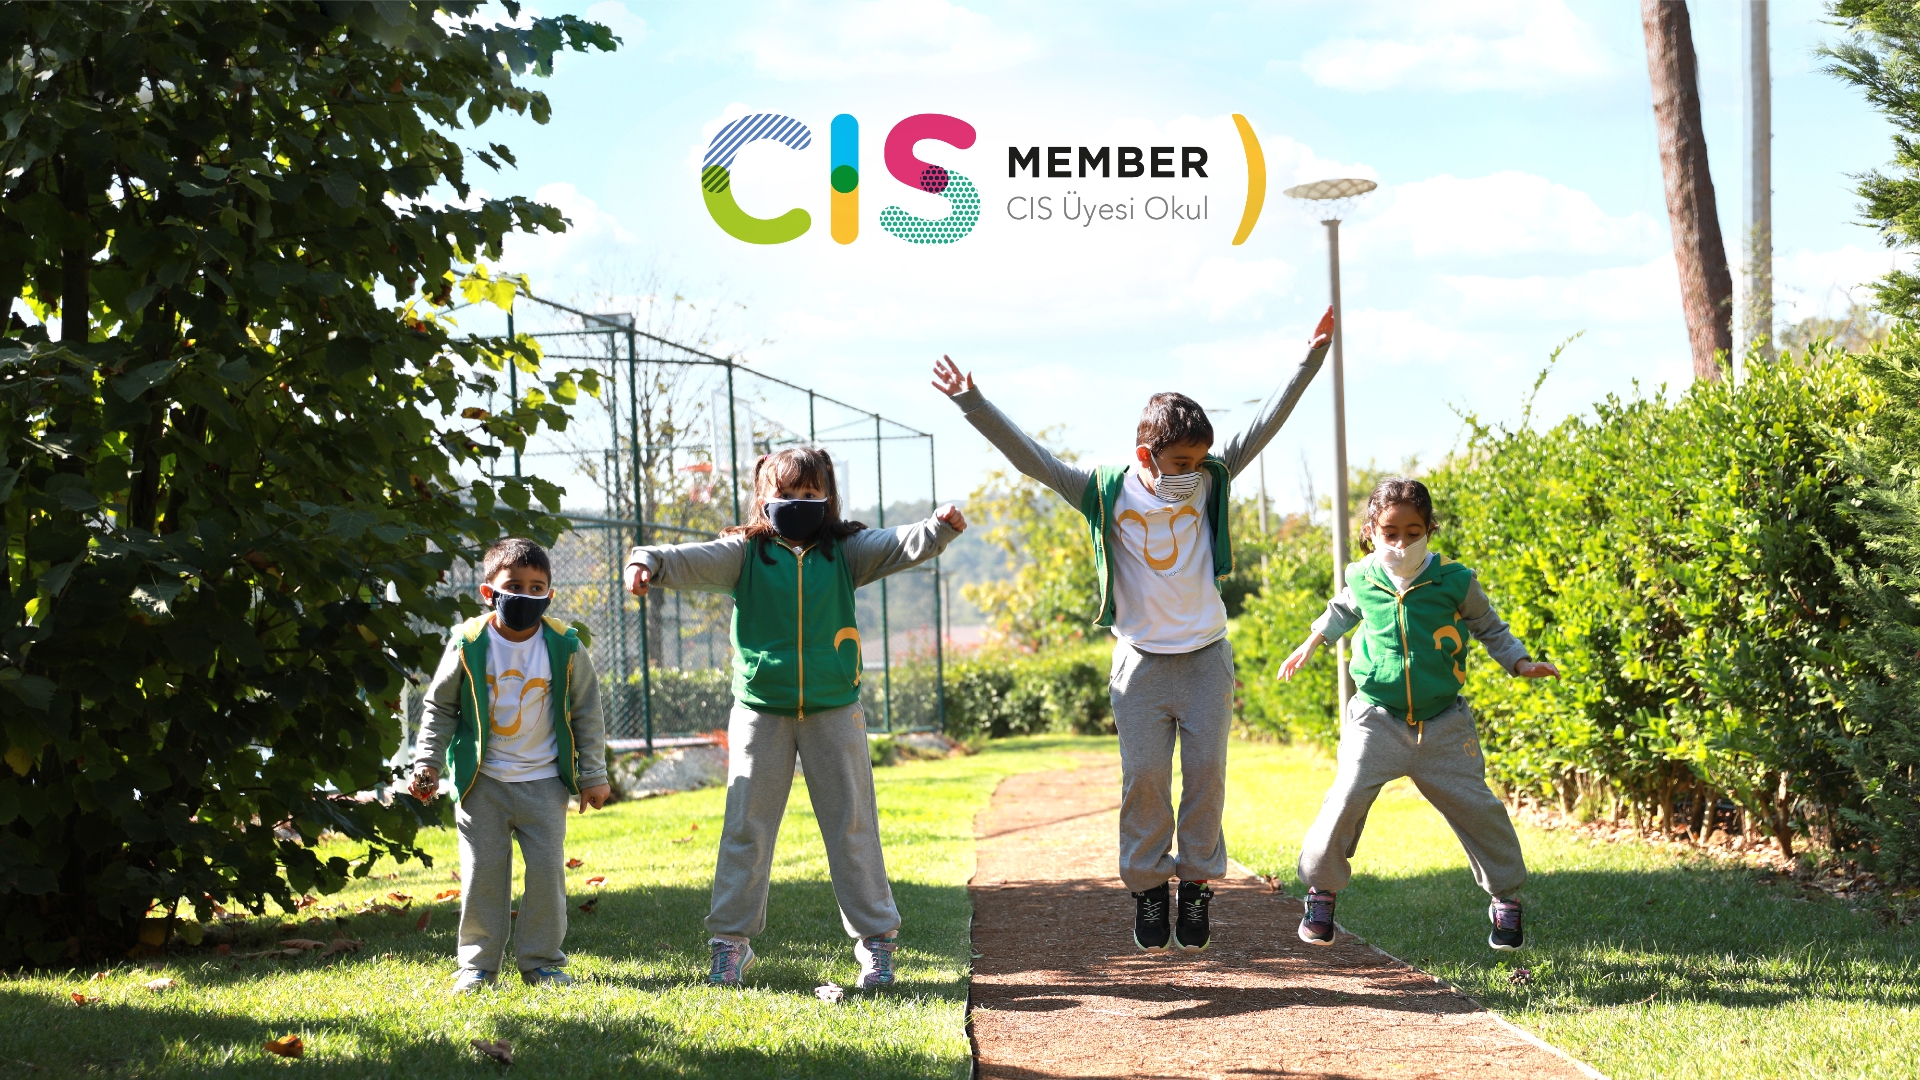 WE BECOME A MEMBER SCHOOL OF THE COUNCIL OF INTERNATIONAL SCHOOLS (CIS)!